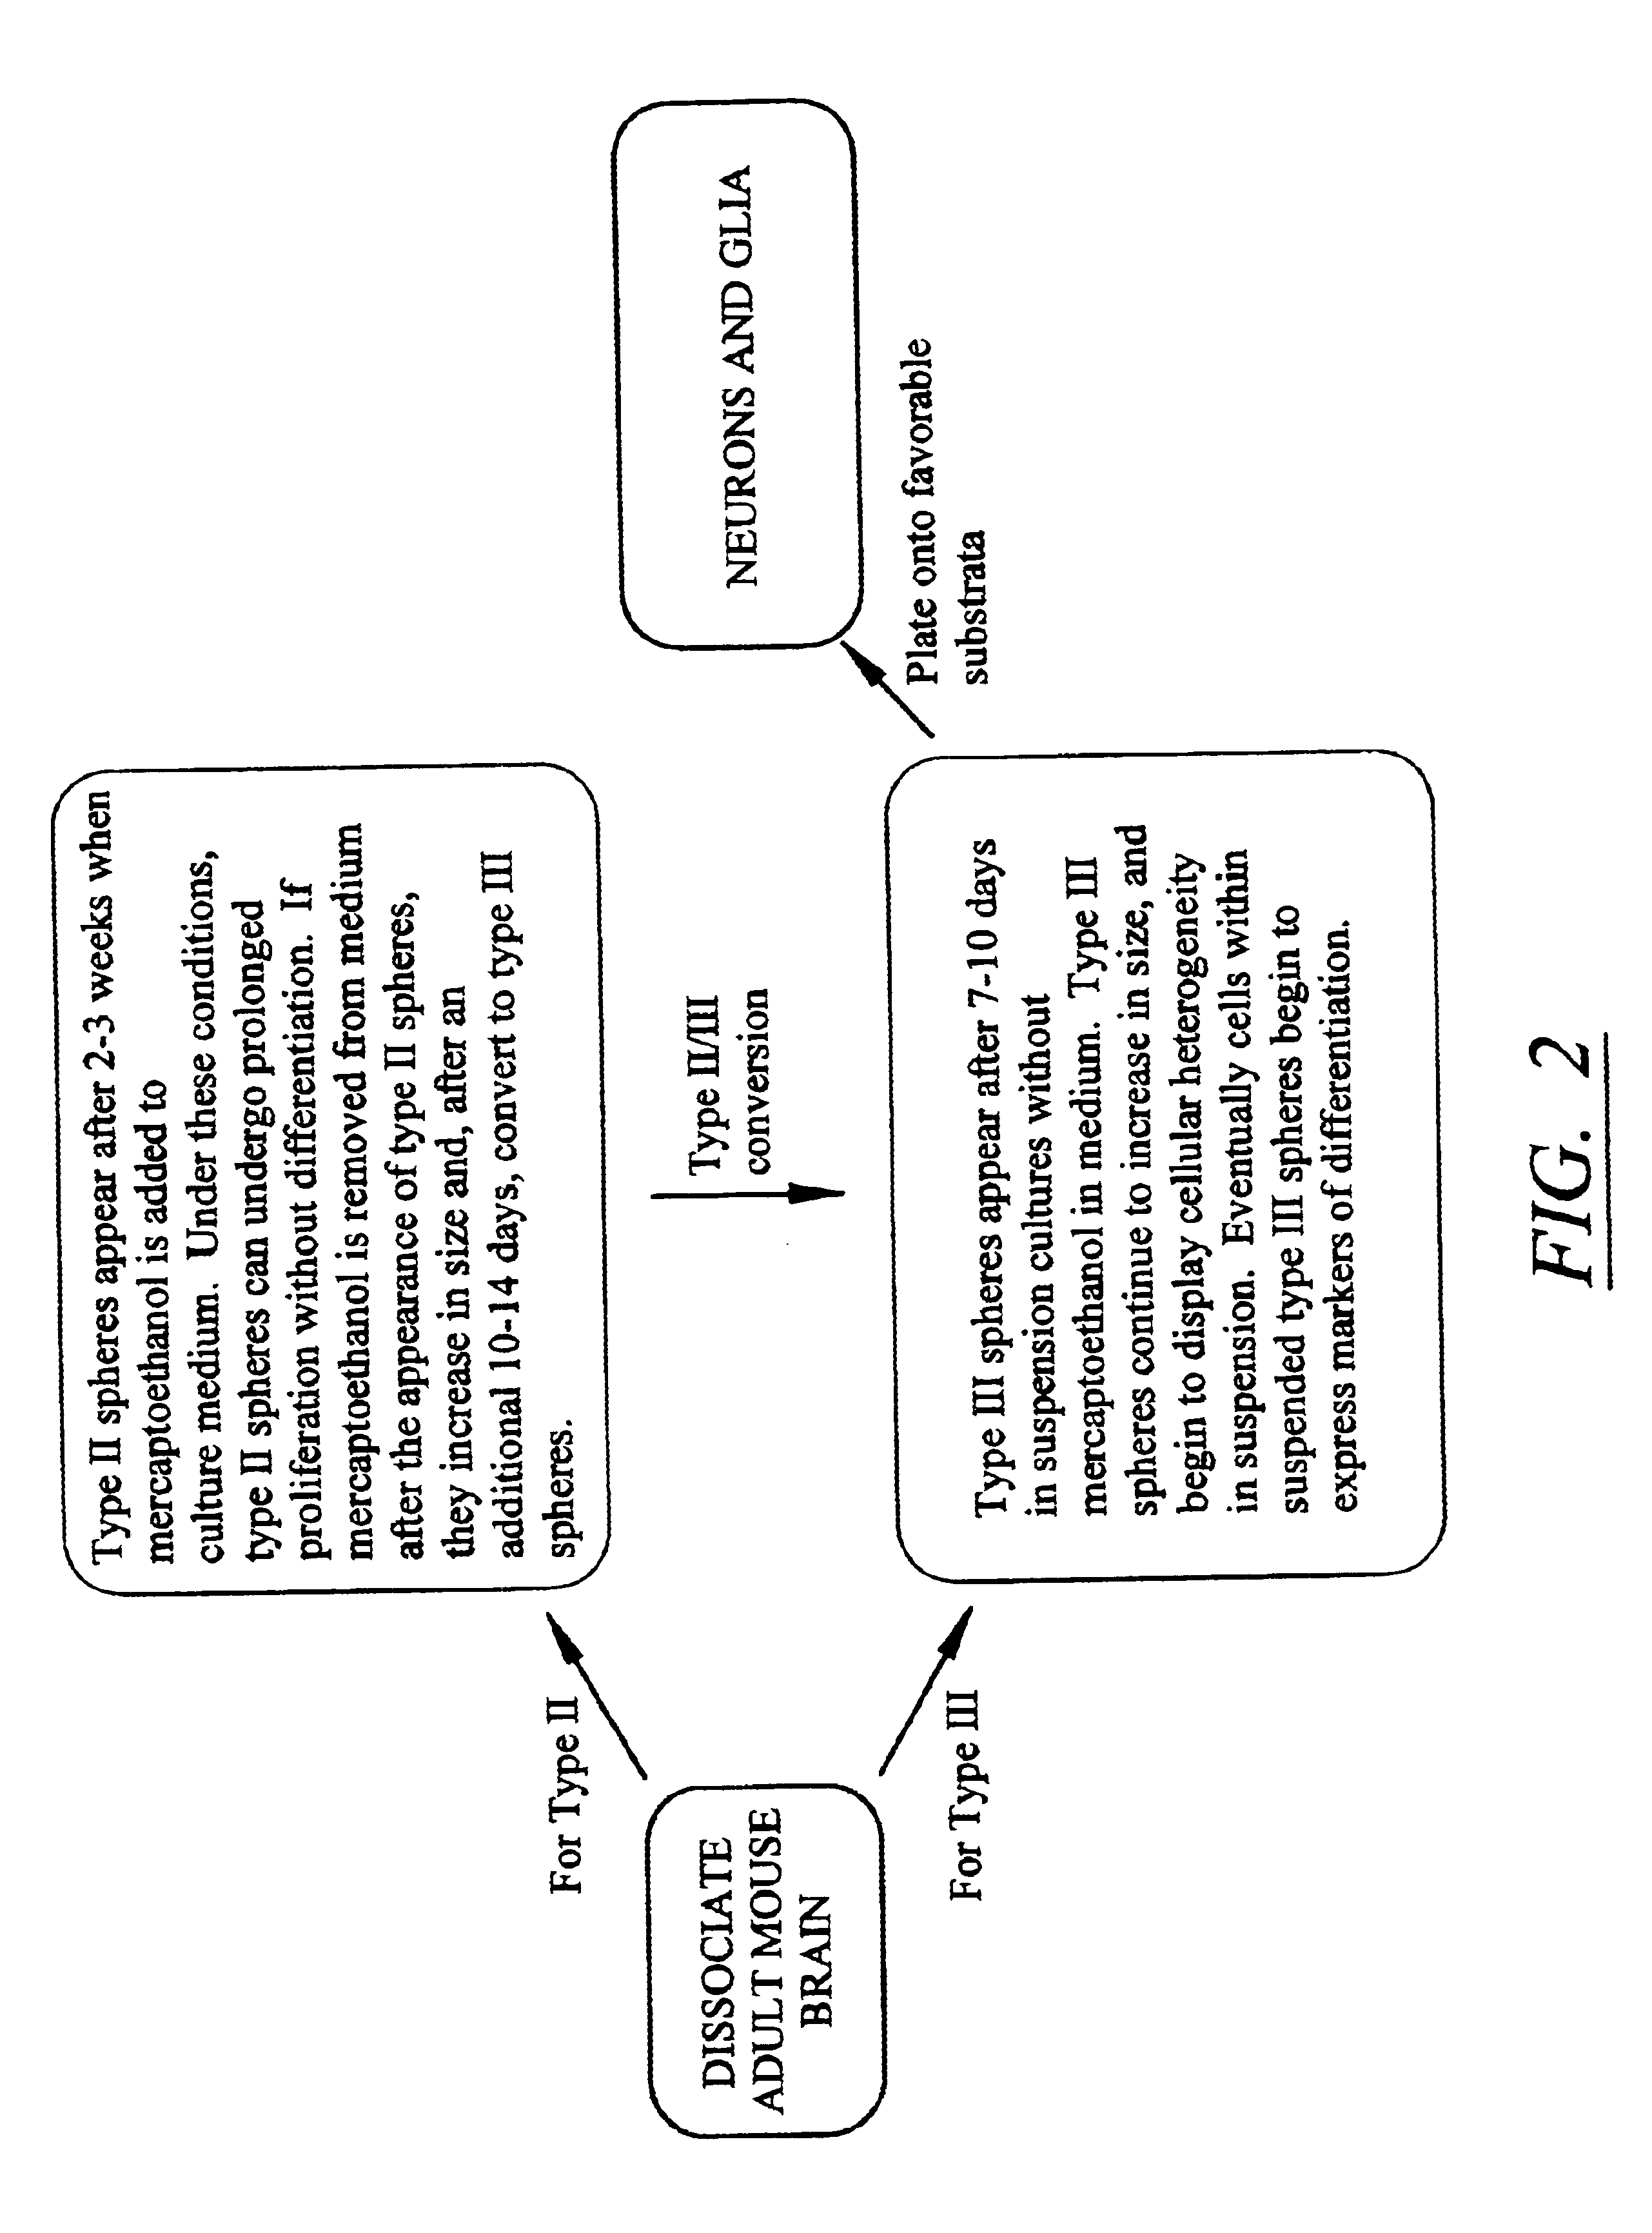 Isolated mammalian neural stem cells, methods of making such cells